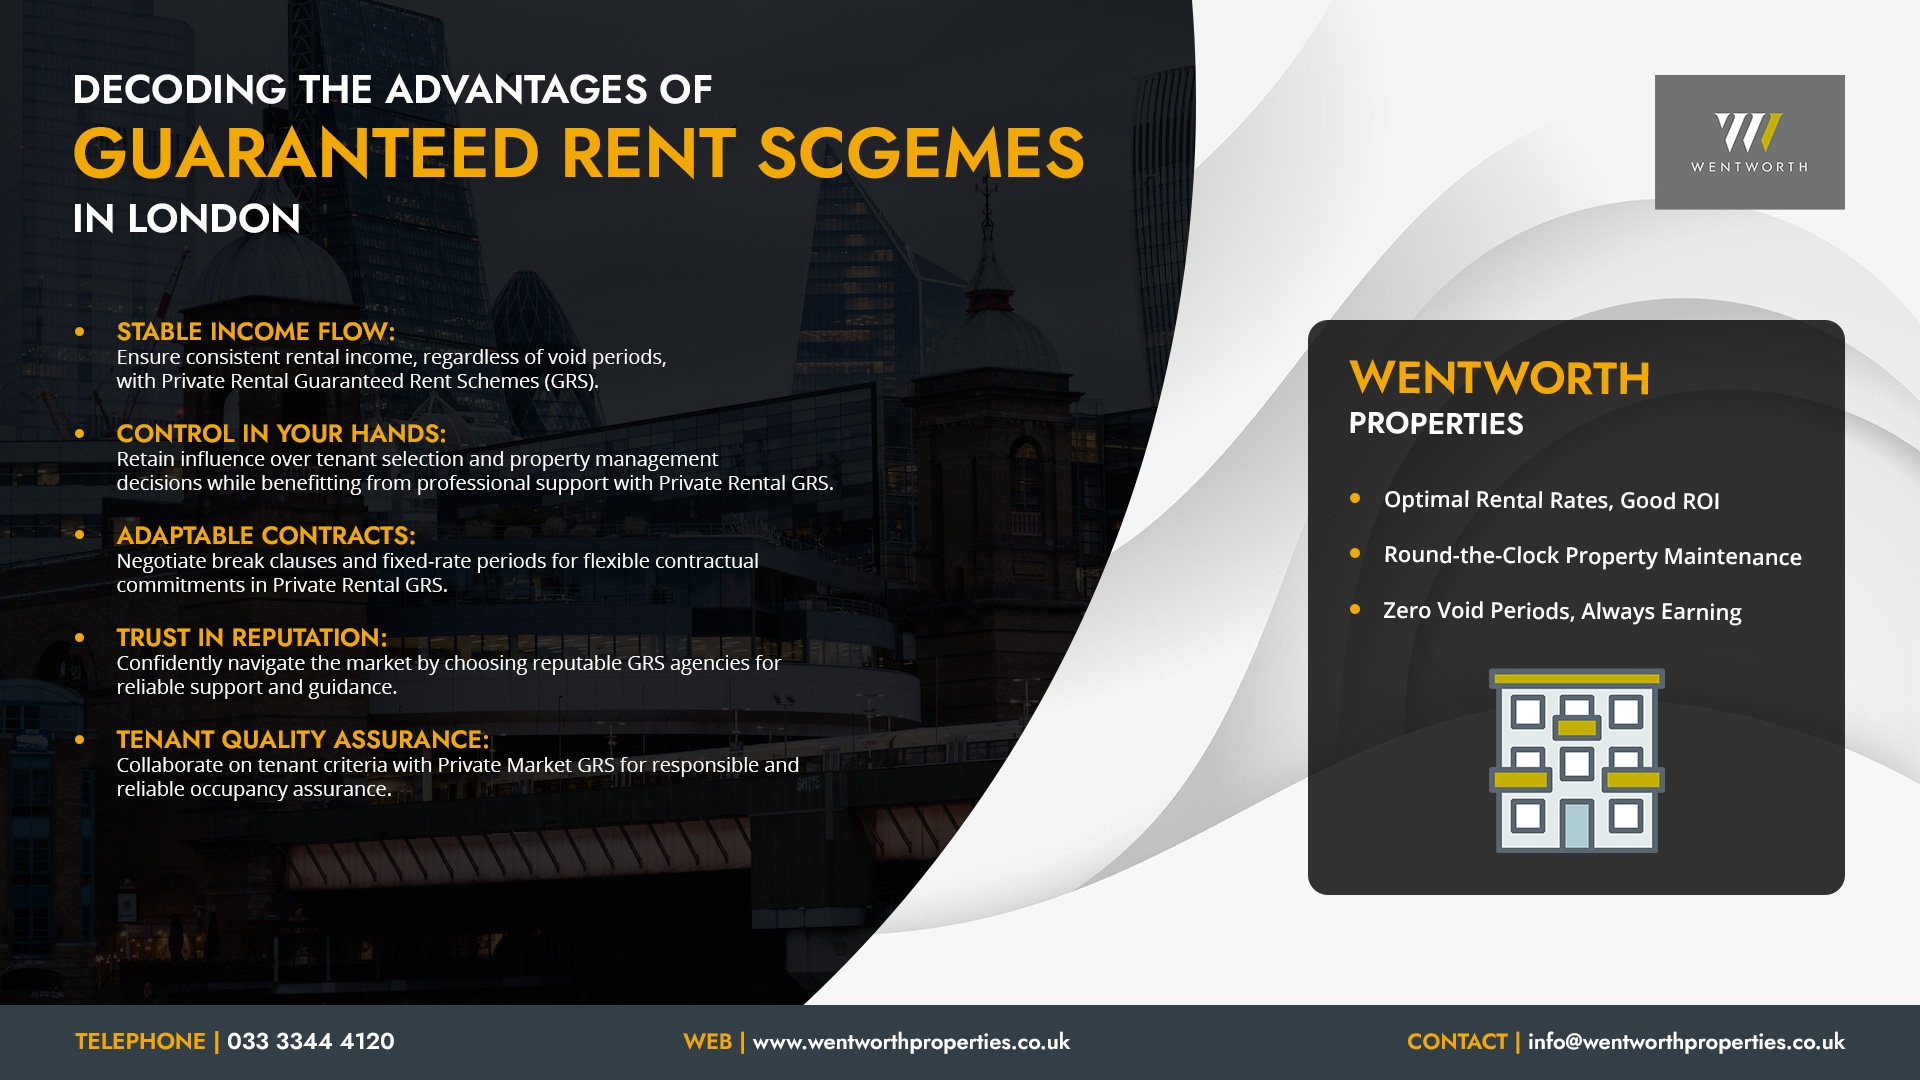 information about Guaranteed Rent Schemes in London